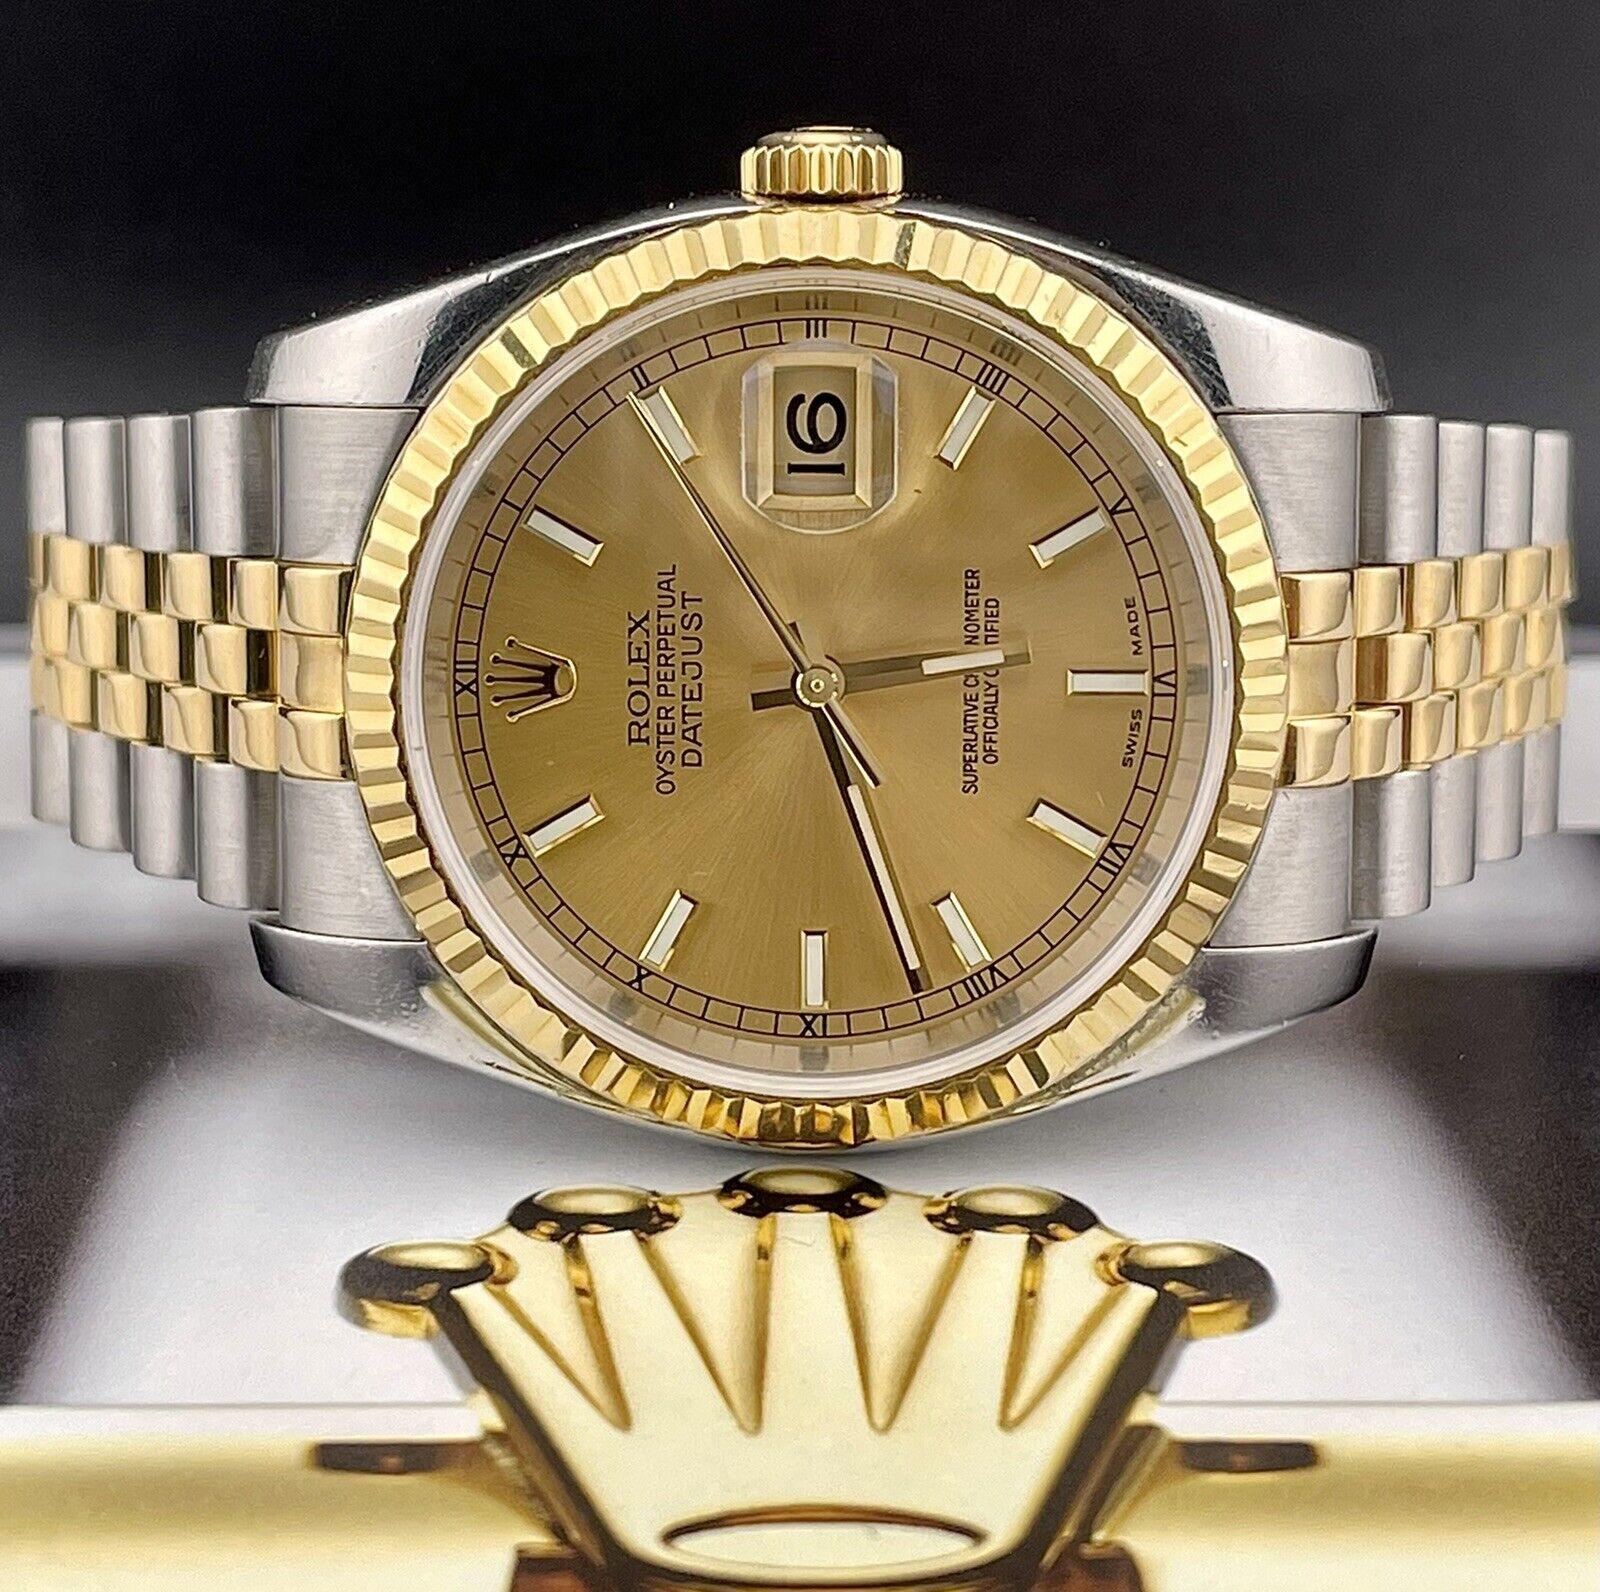 Rolex Datejust 36mm Watch. A Pre-owned watch w/ Gift Box. Watch is 100% Authentic and Comes with
Authenticity Card. Watch Reference is 116233 and is in Excellent Condition (See Pictures). The dial color is
Gold and material is Stainless steel and